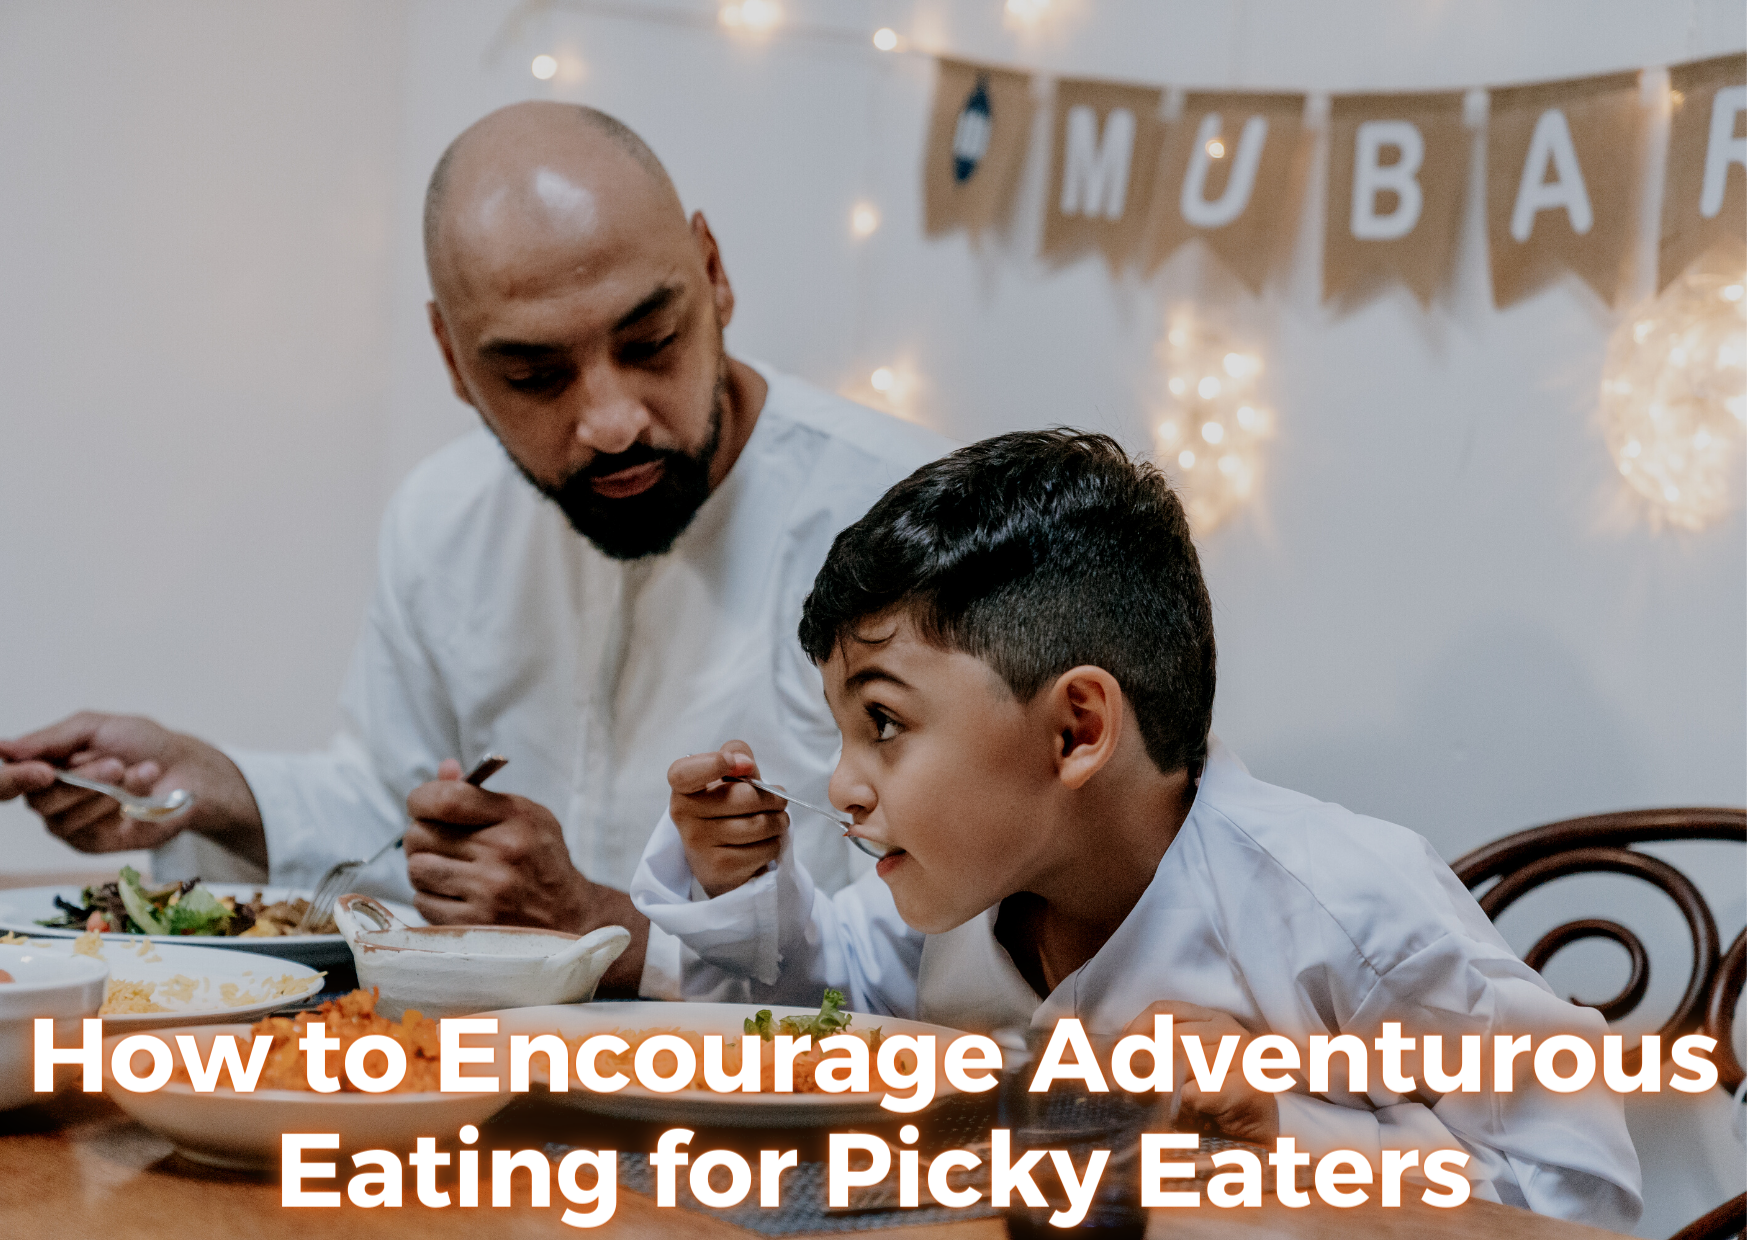 How to Encourage Adventurous Eating for Picky Eaters